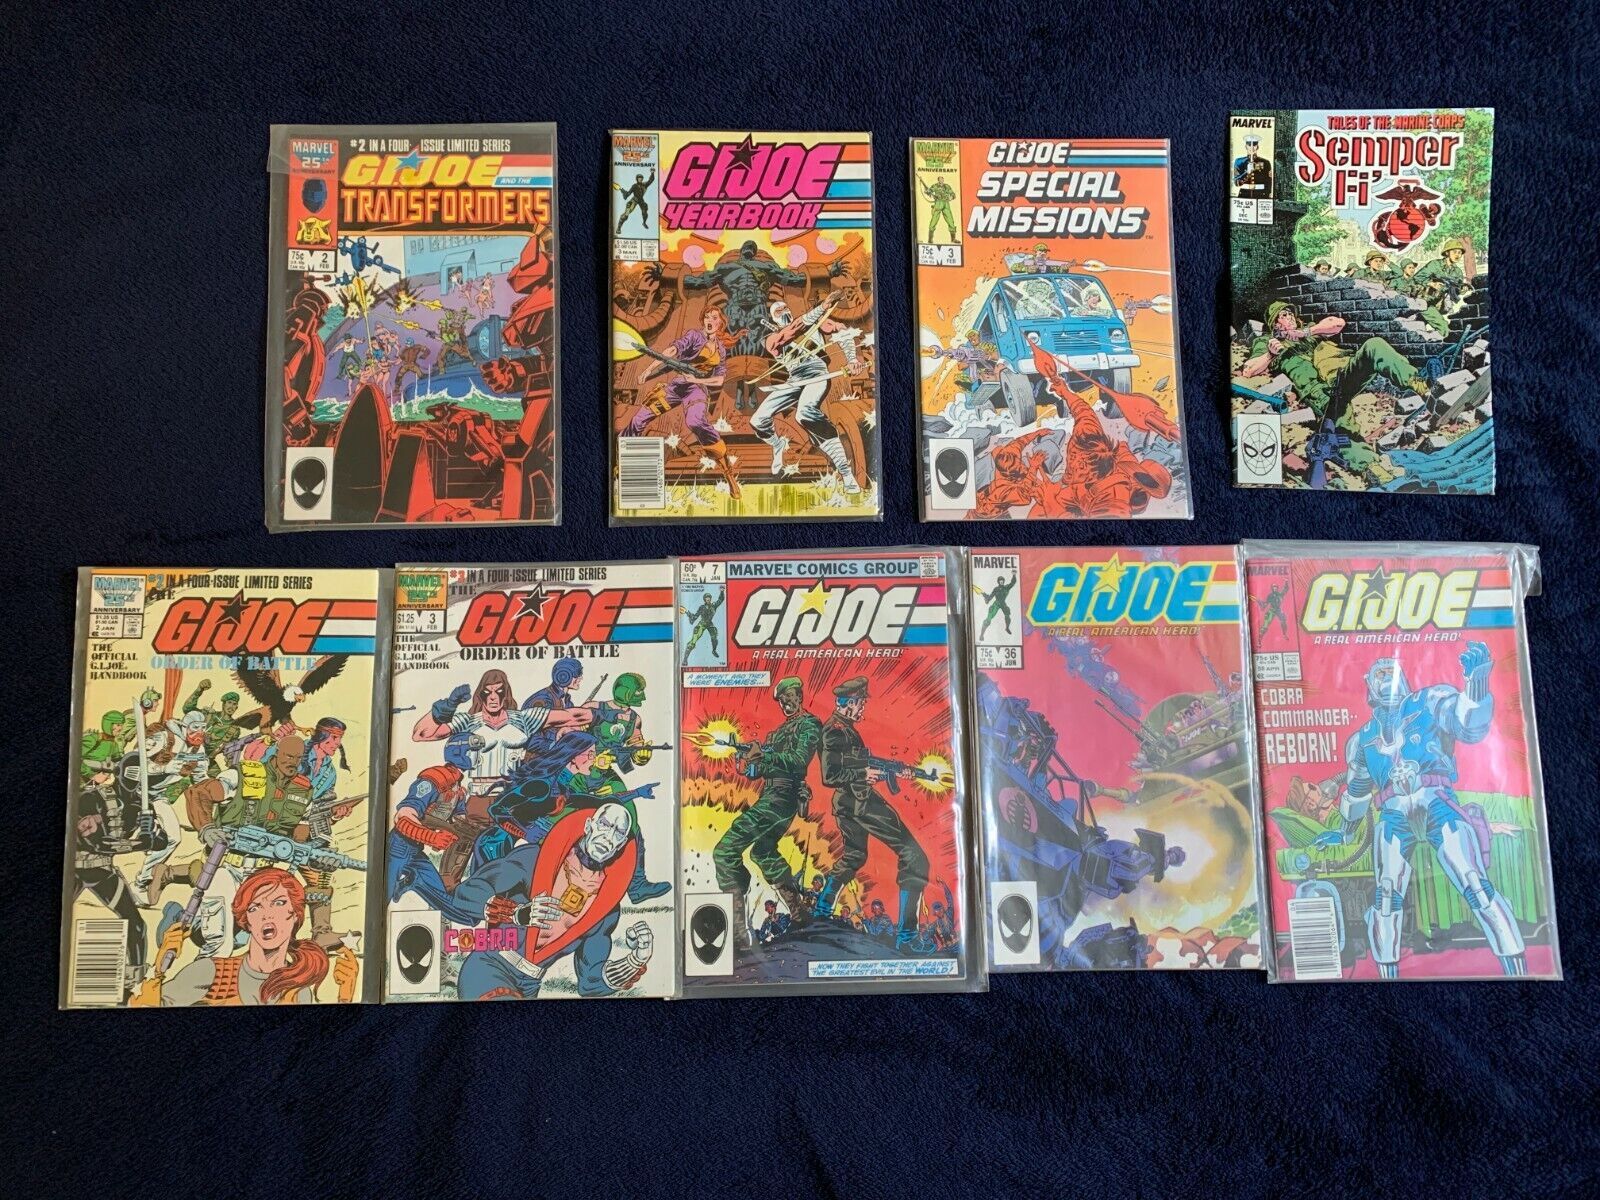 G.I. Joe Marvel Comics Mixed Lot of 8 Transformers Yearbook Order of Battle 